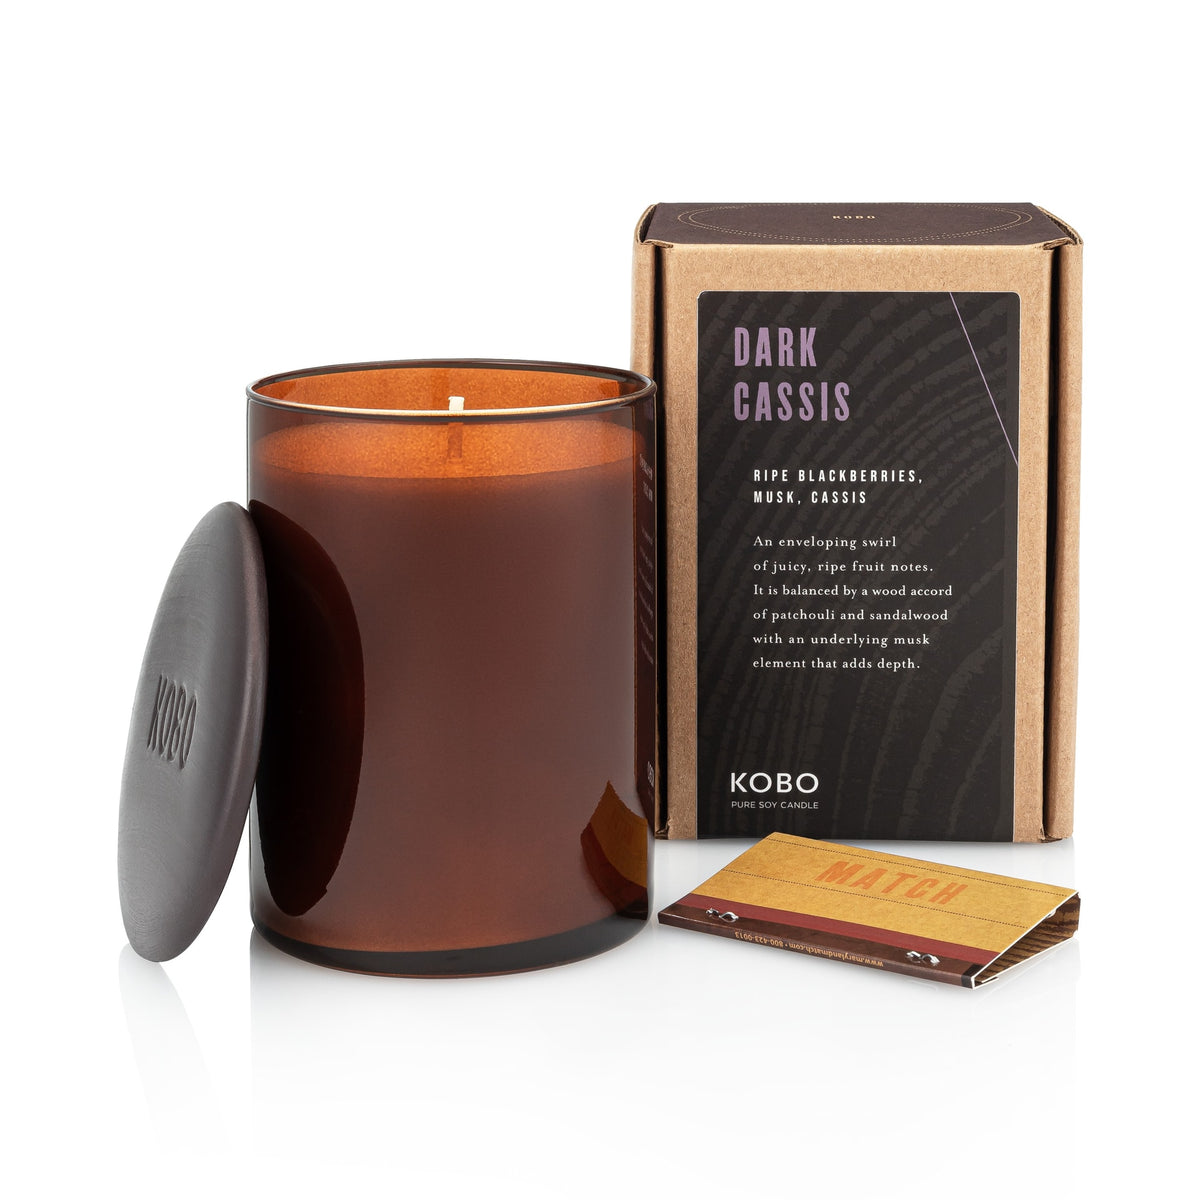 Primary Image of Dark Cassis Woodblock Candle